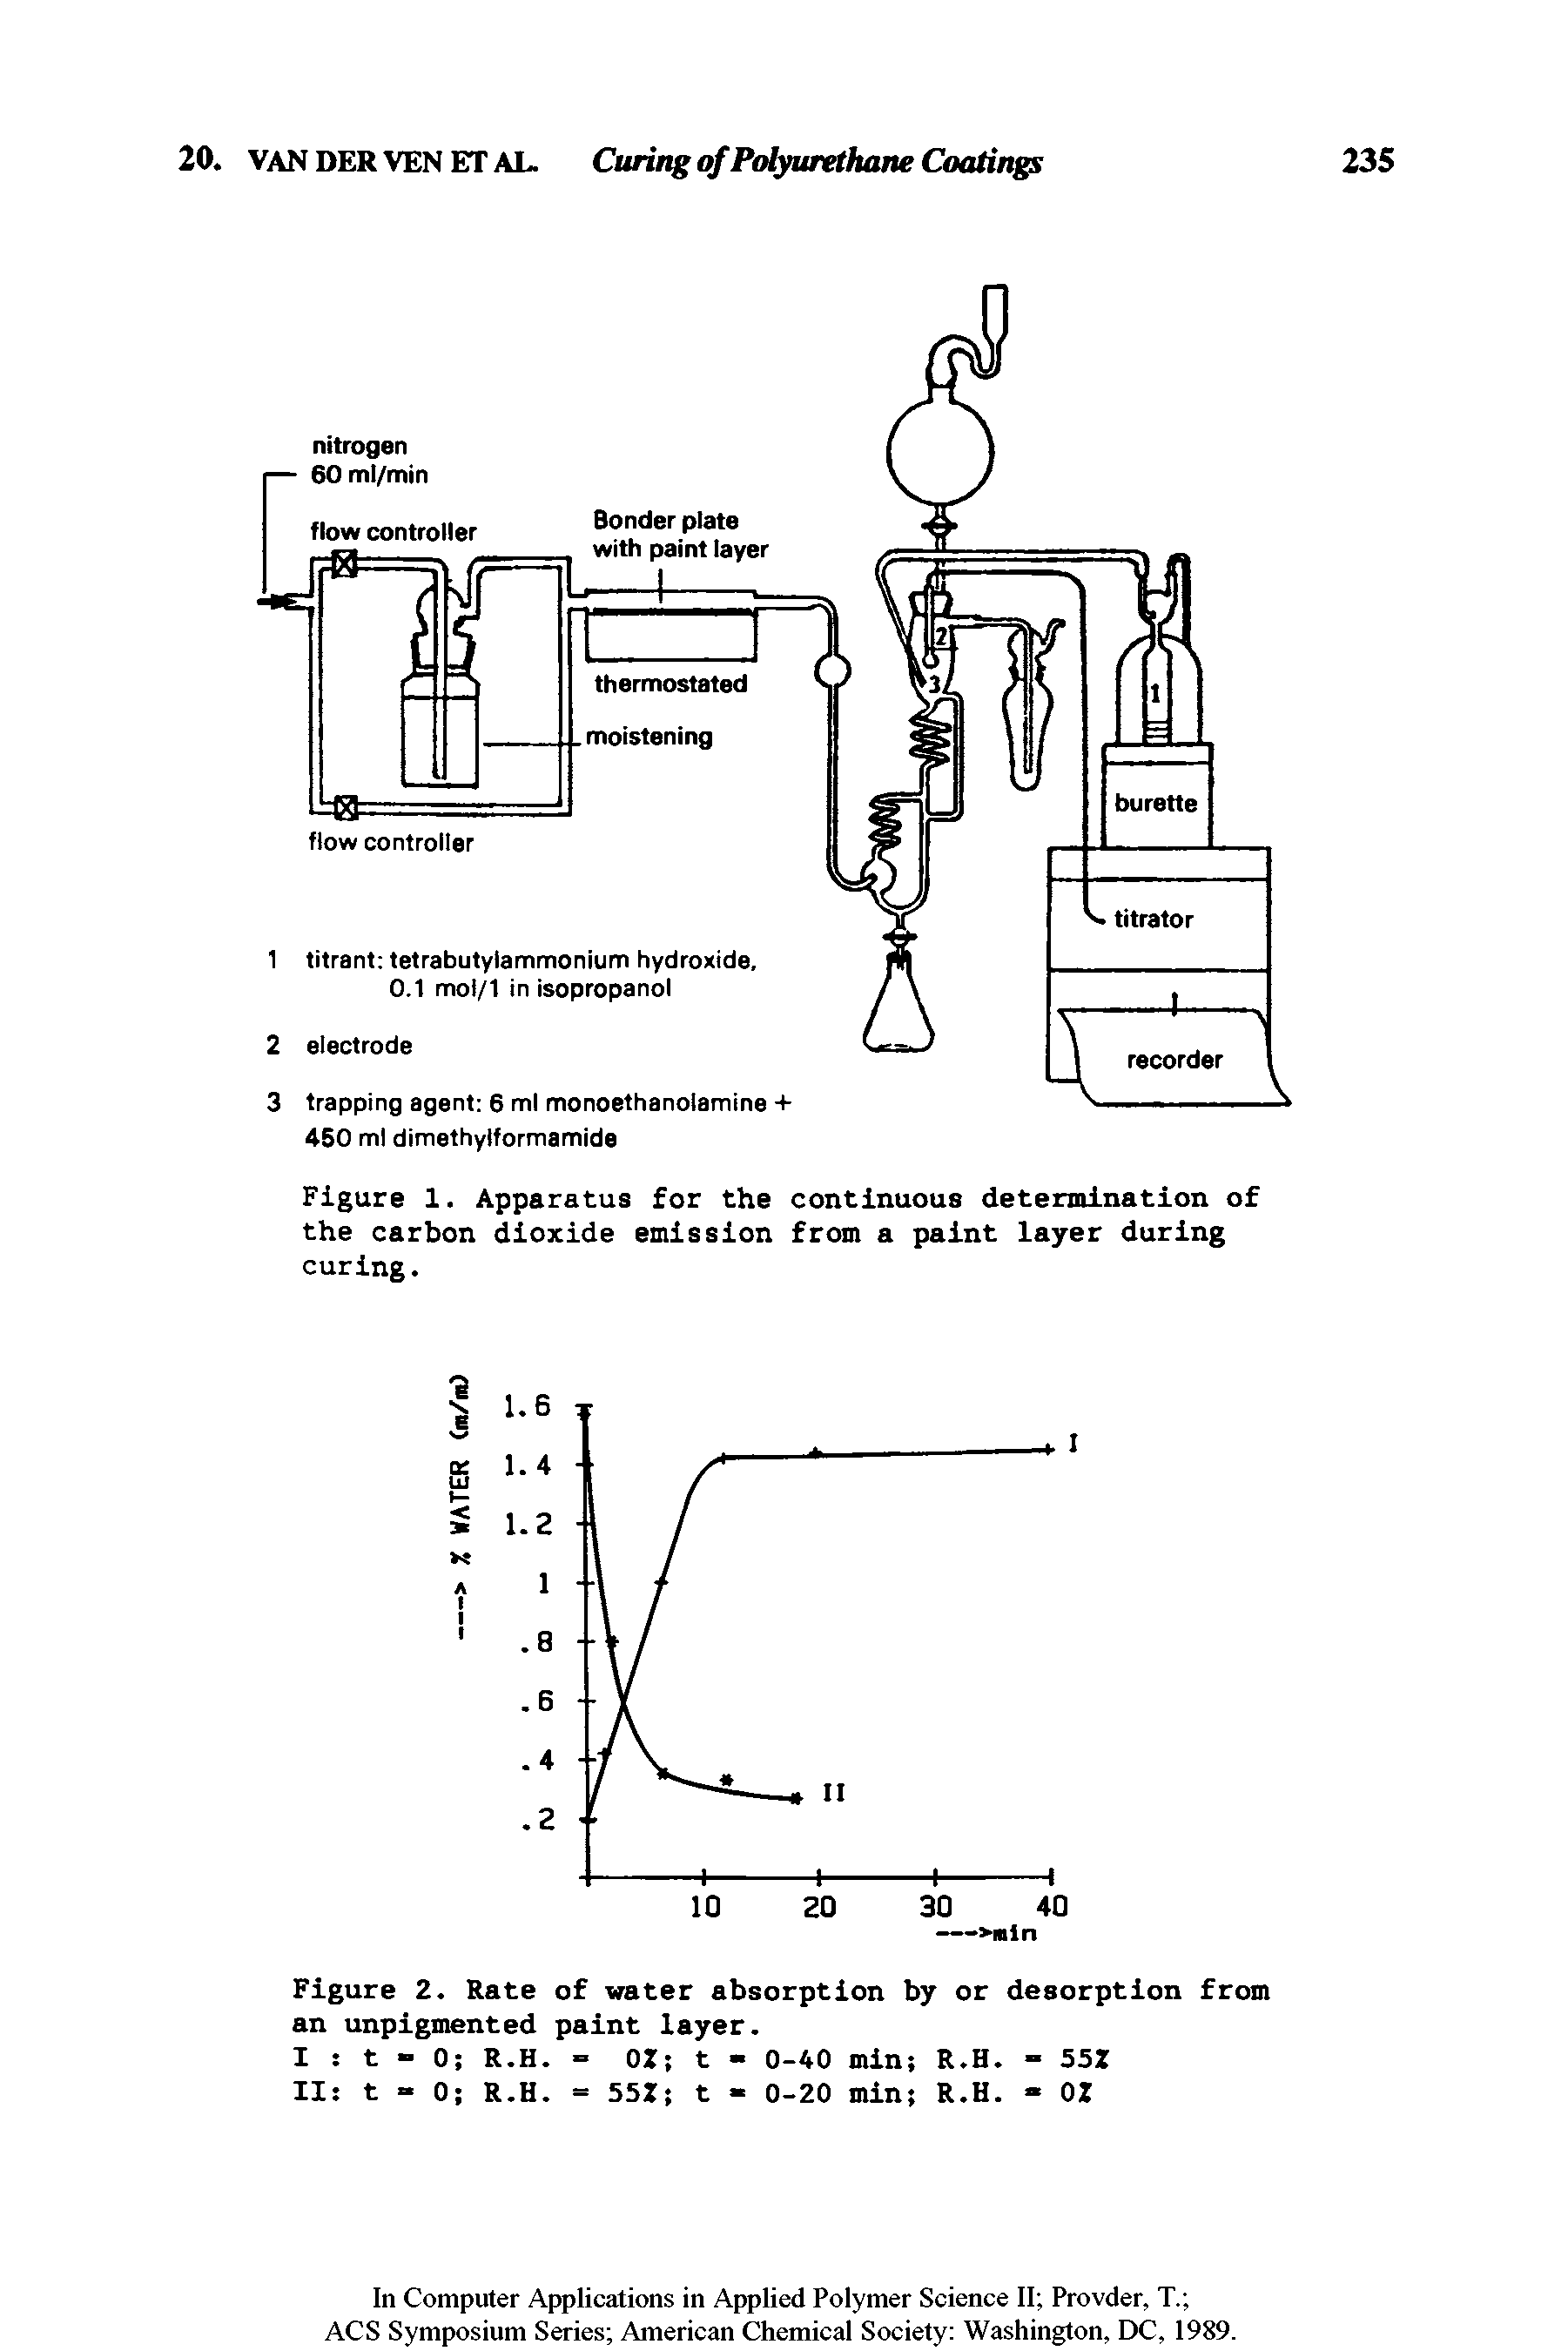 Figure 1. Apparatus for the continuous determination of the carbon dioxide emission from a paint layer during curing.